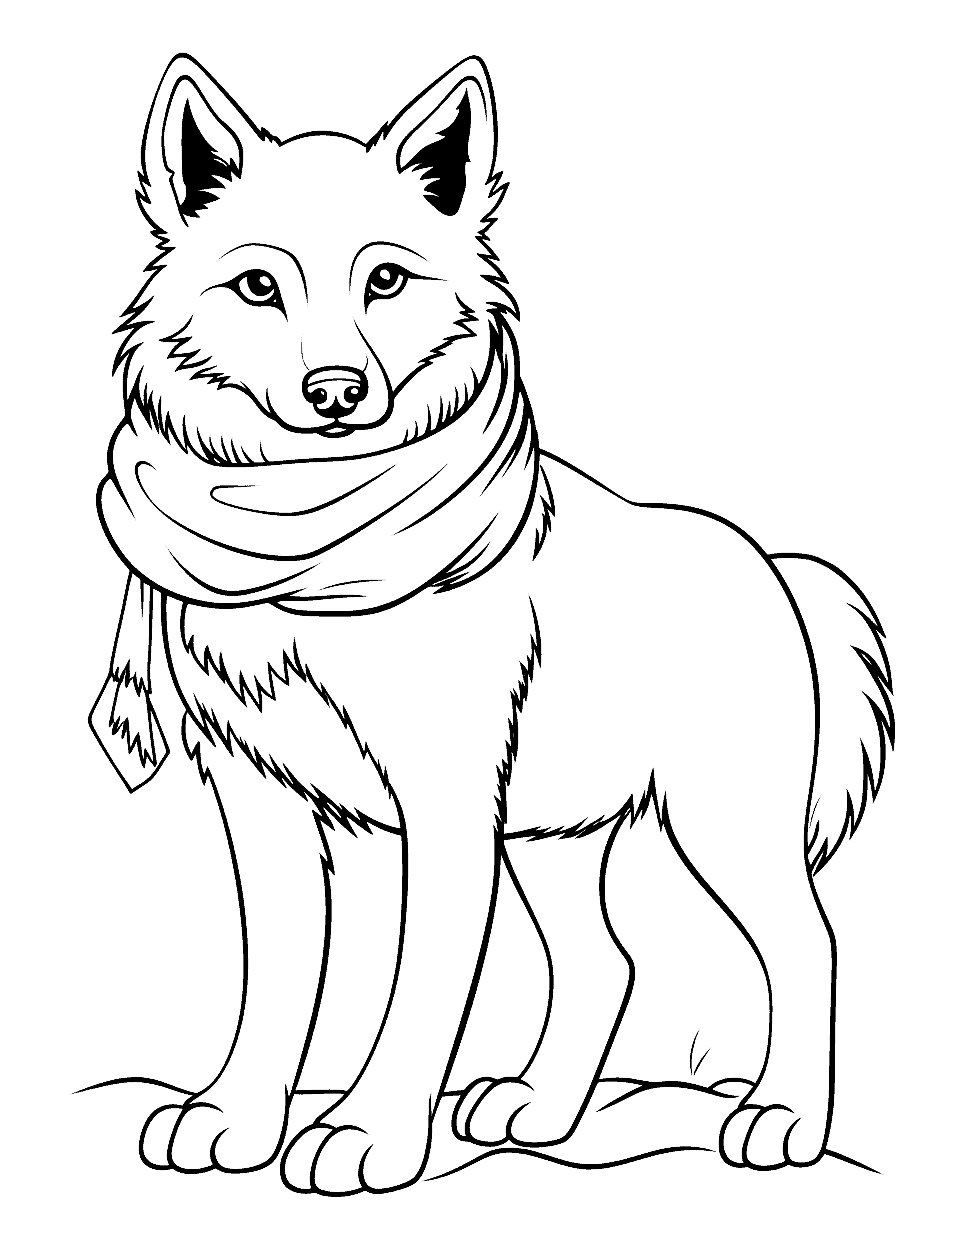 Wolf in a Winter Scarf Coloring Page - A cute wolf wrapped up warmly in a winter scarf.